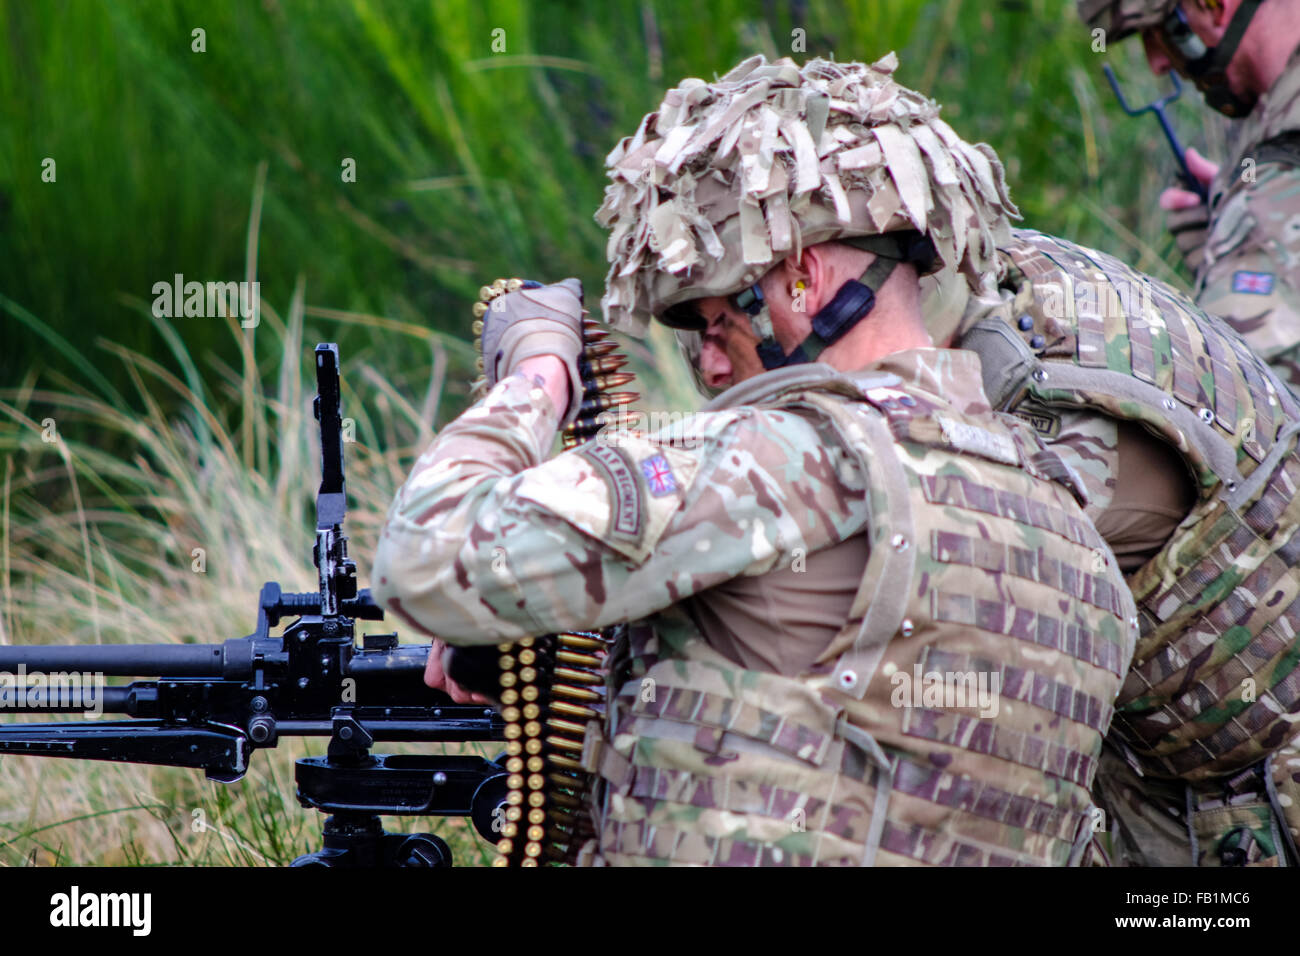 A Royal Air Force RAF regiment soldier loads a machine gun during a drill at Fort George, Scotland. Stock Photo